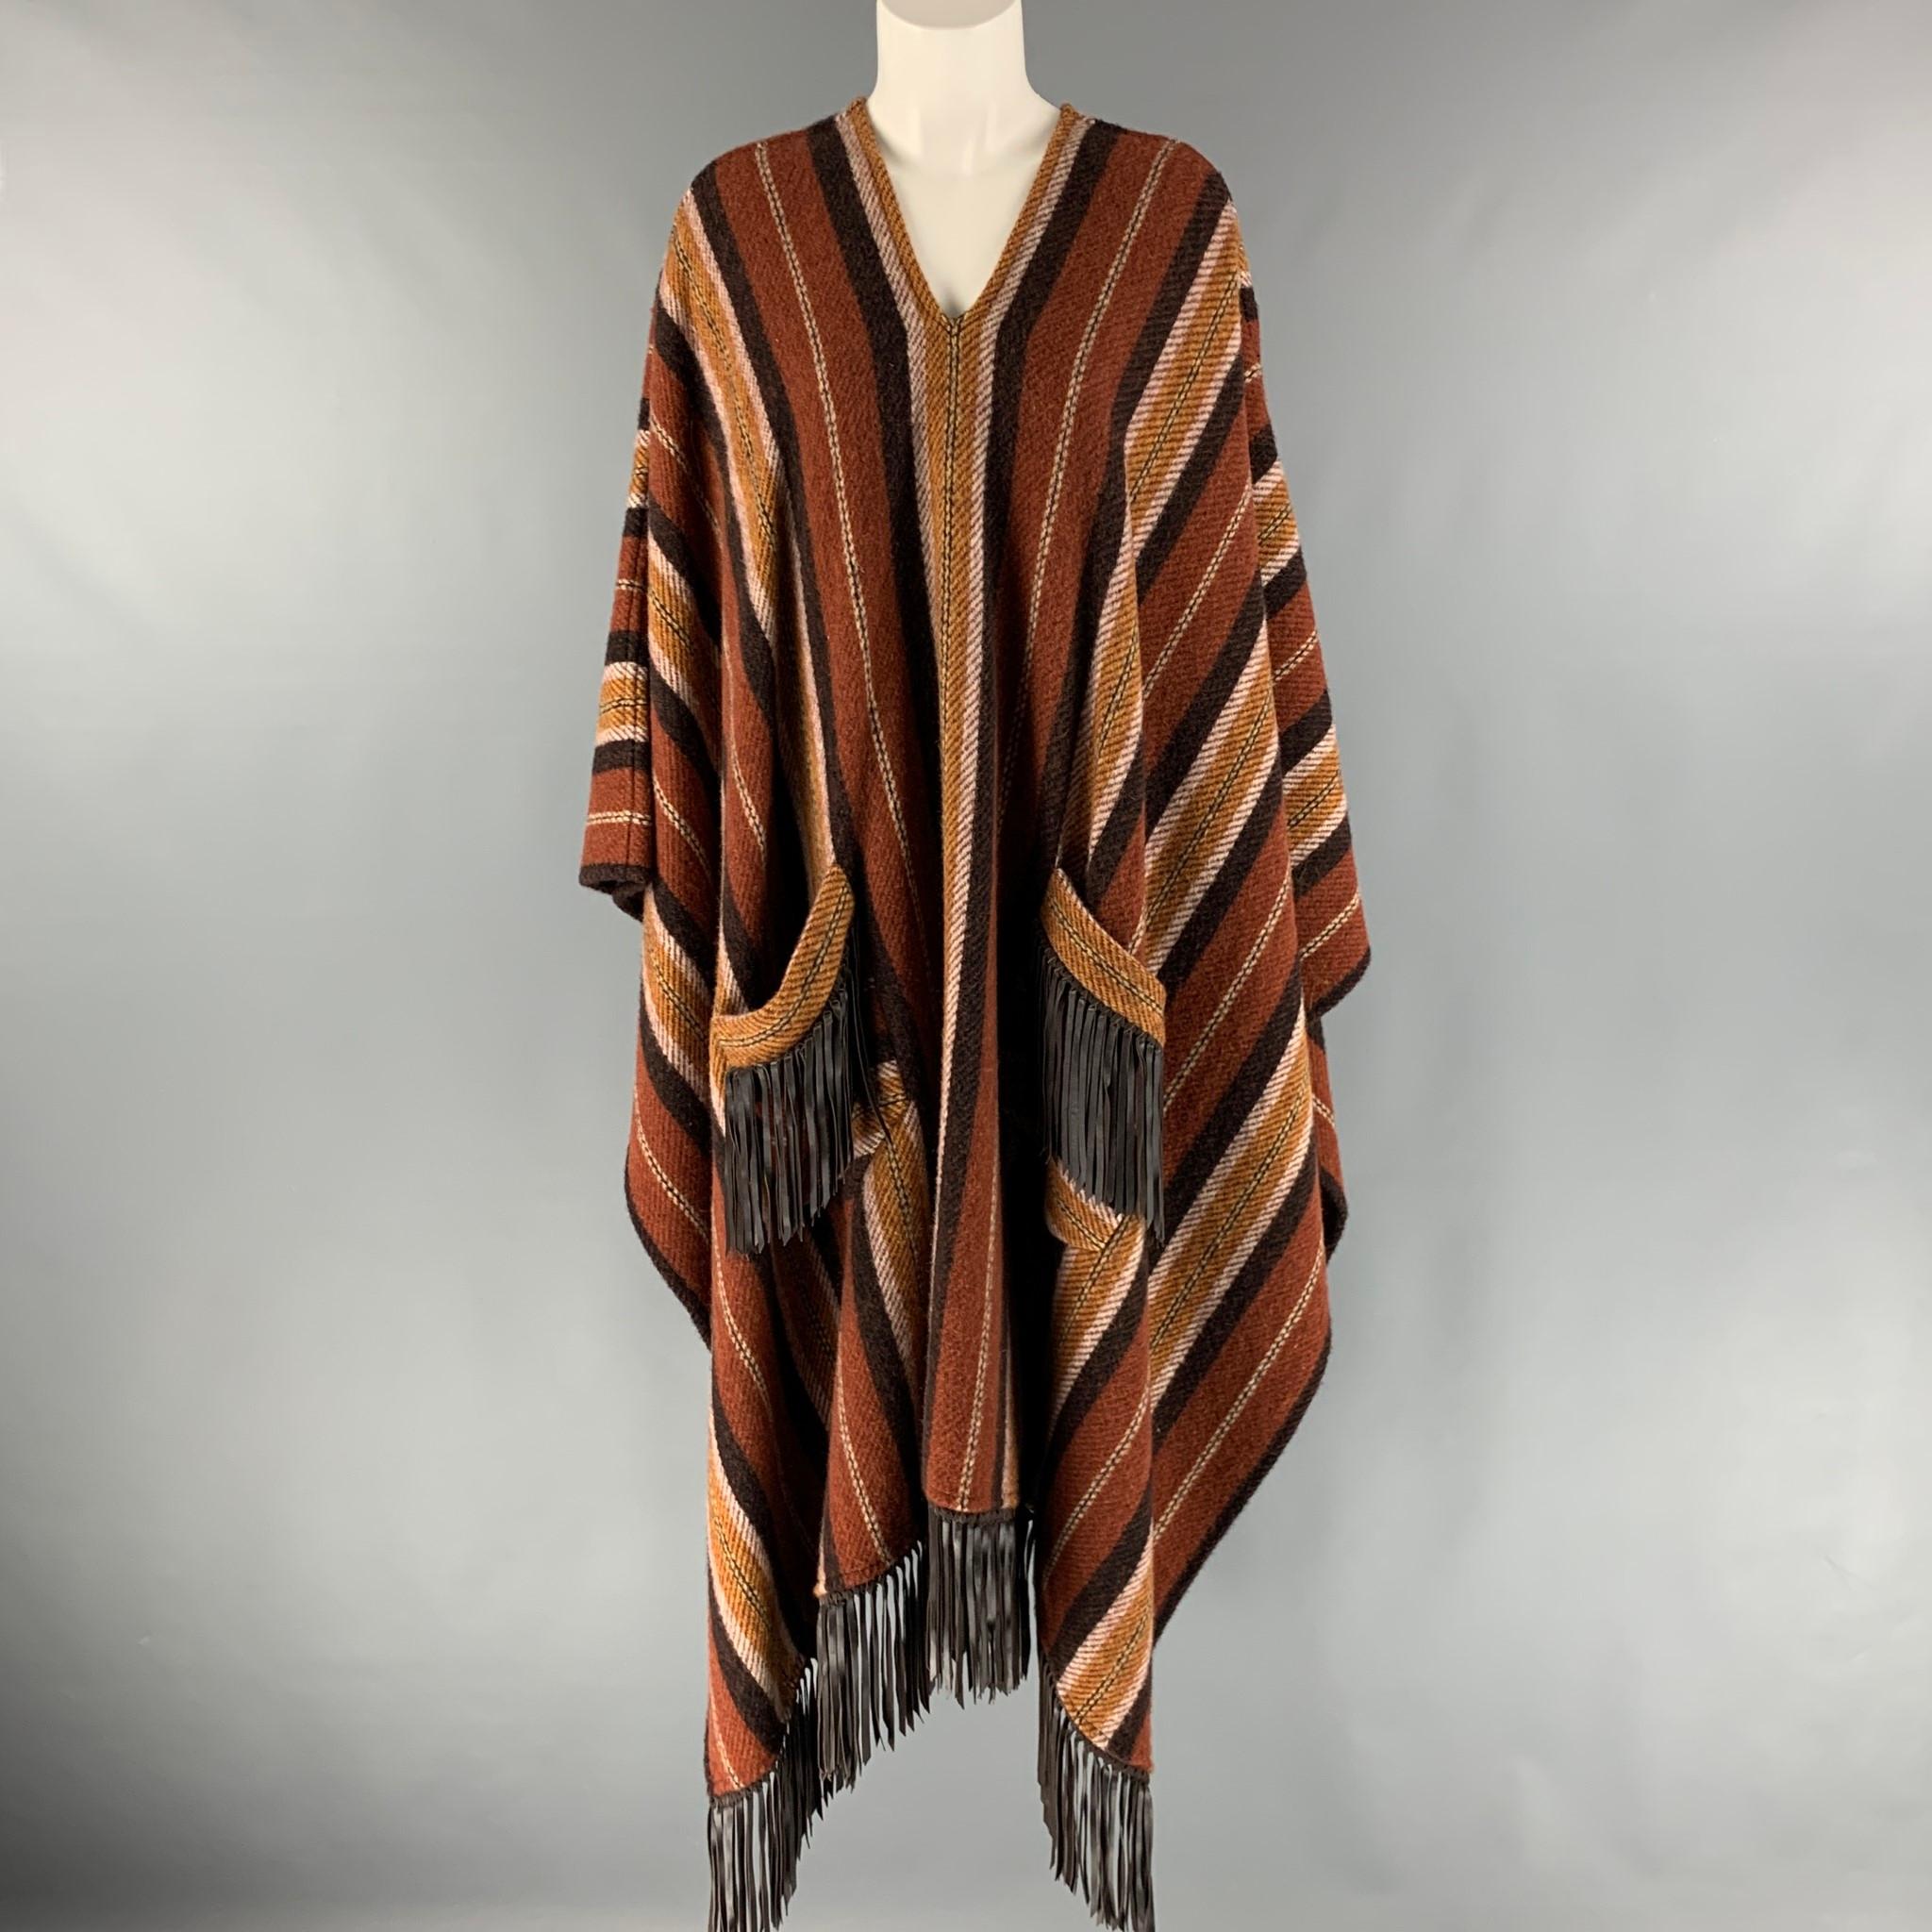 ETRO poncho comes in a brown and tan stripped wool knit featuring boho style, leather fringe trim, and front pockets. Made in Italy.

Excellent Pre-Owned Condition.
Marked: 40

Measurements:

Length: 43 in.  

SKU: 124838
Category: Cape

More